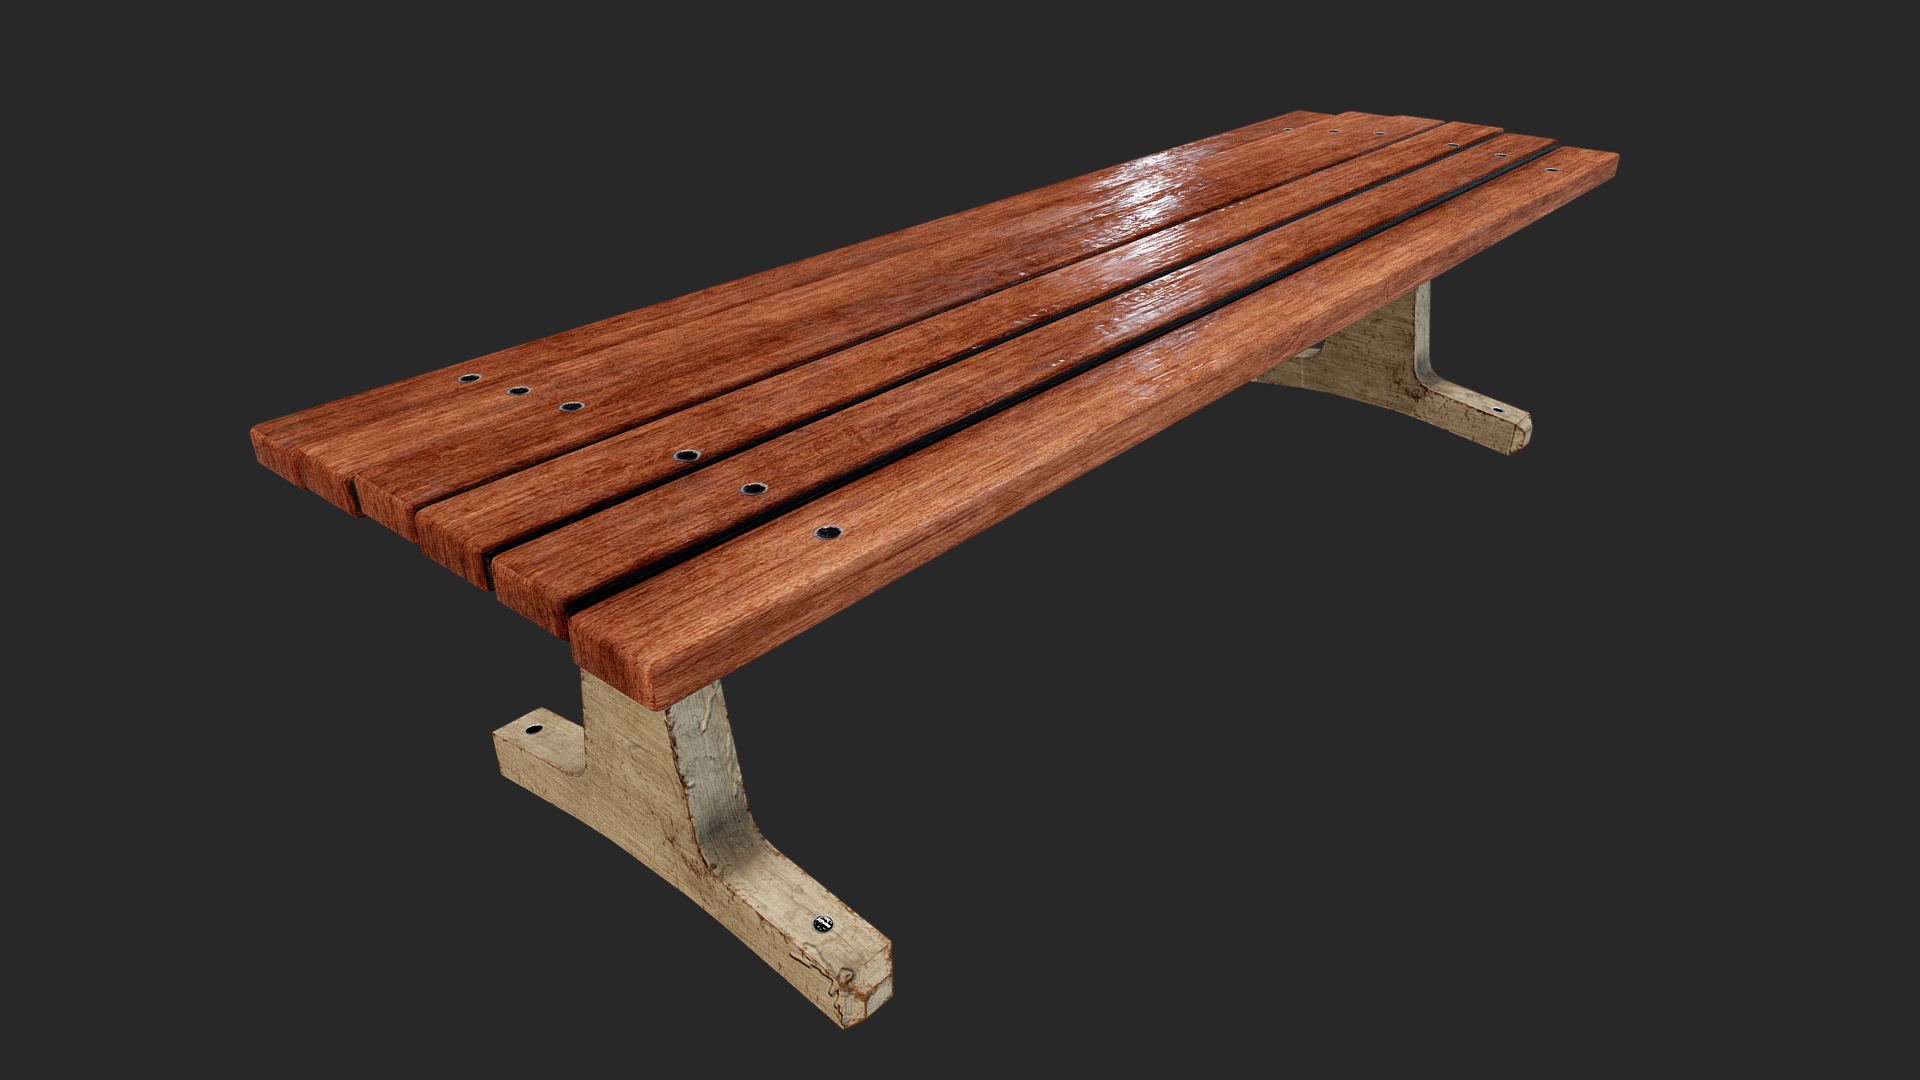 3D model Park Bench - This is a 3D model of the Park Bench. The 3D model is about a wooden bench with a black background.